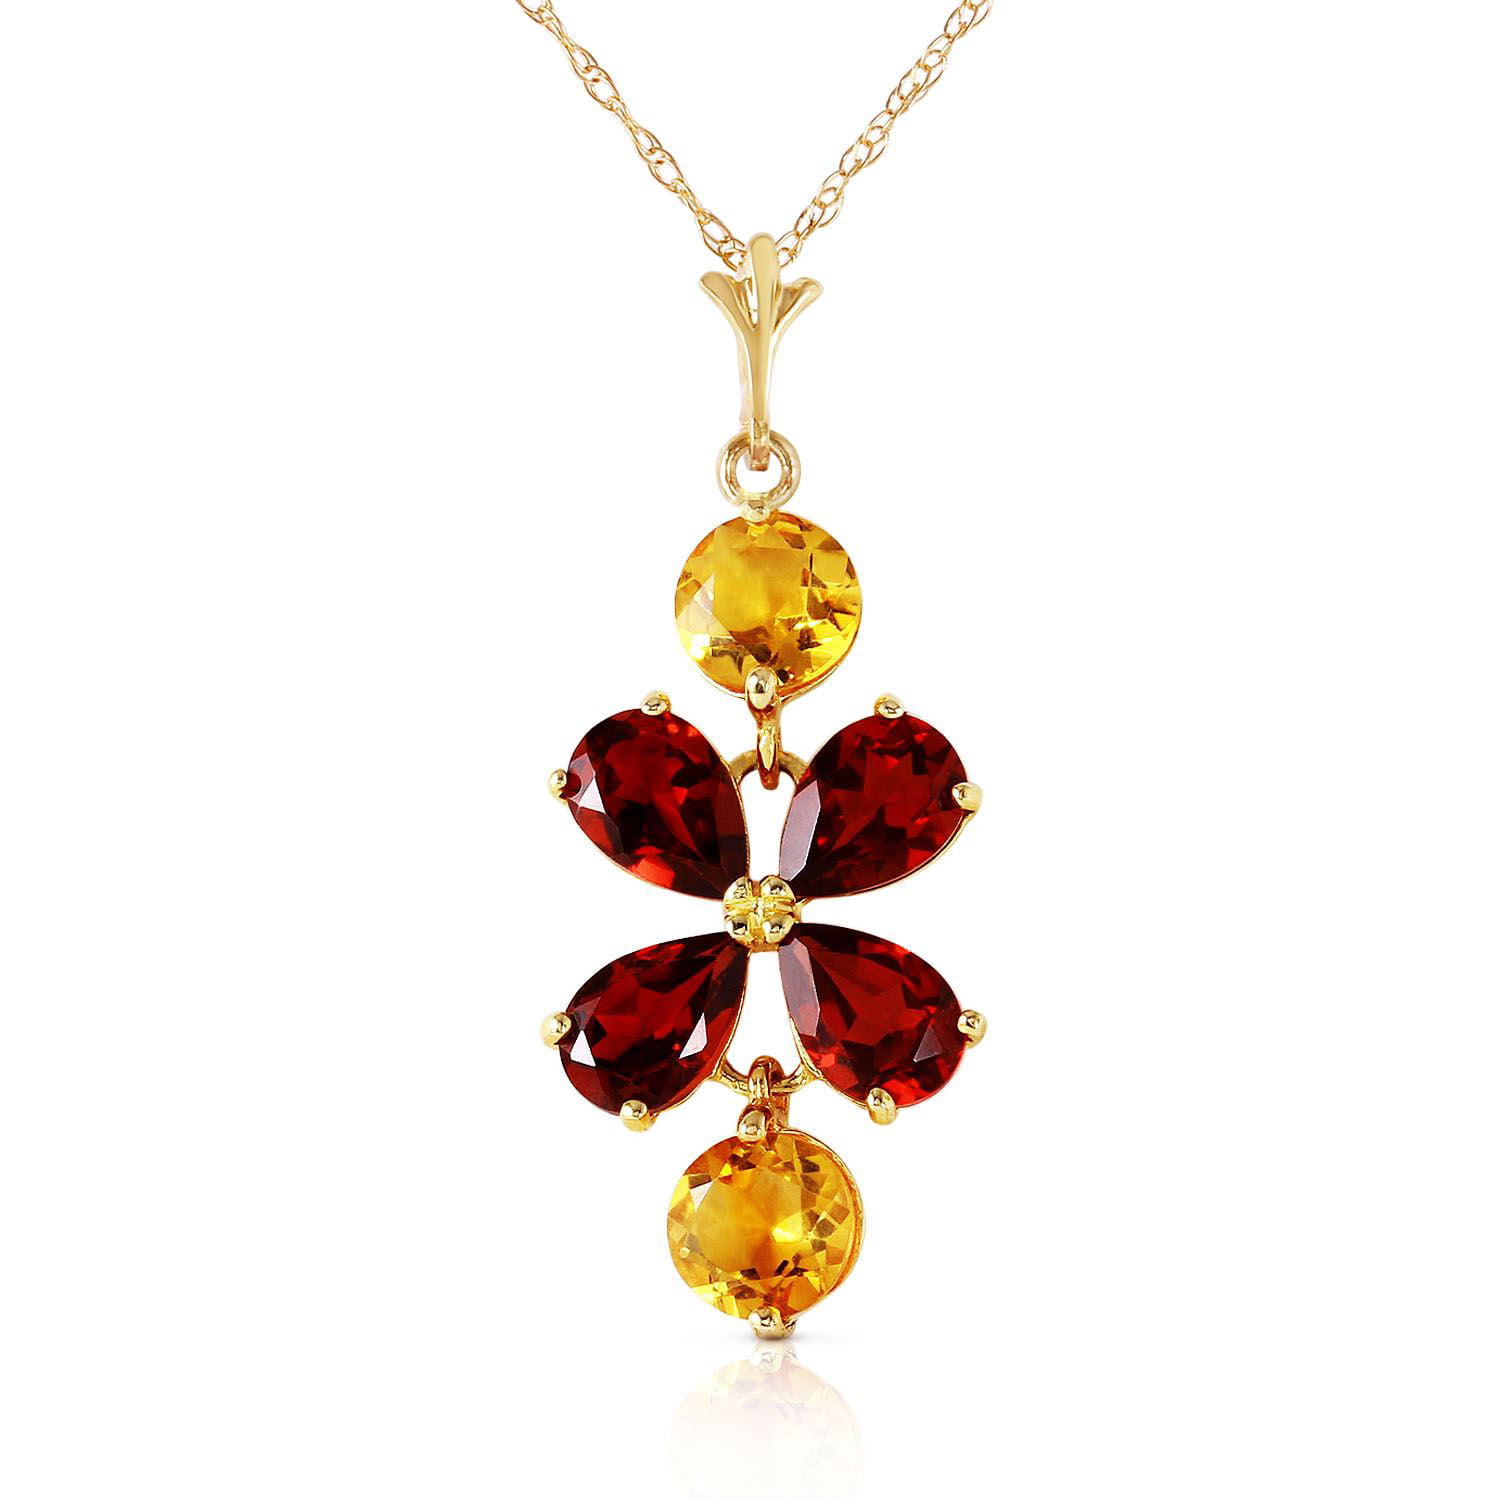 ALARRI 3.15 Carat 14K Solid Rose Gold Necklace Garnet Citrine with 20 Inch Chain Length 